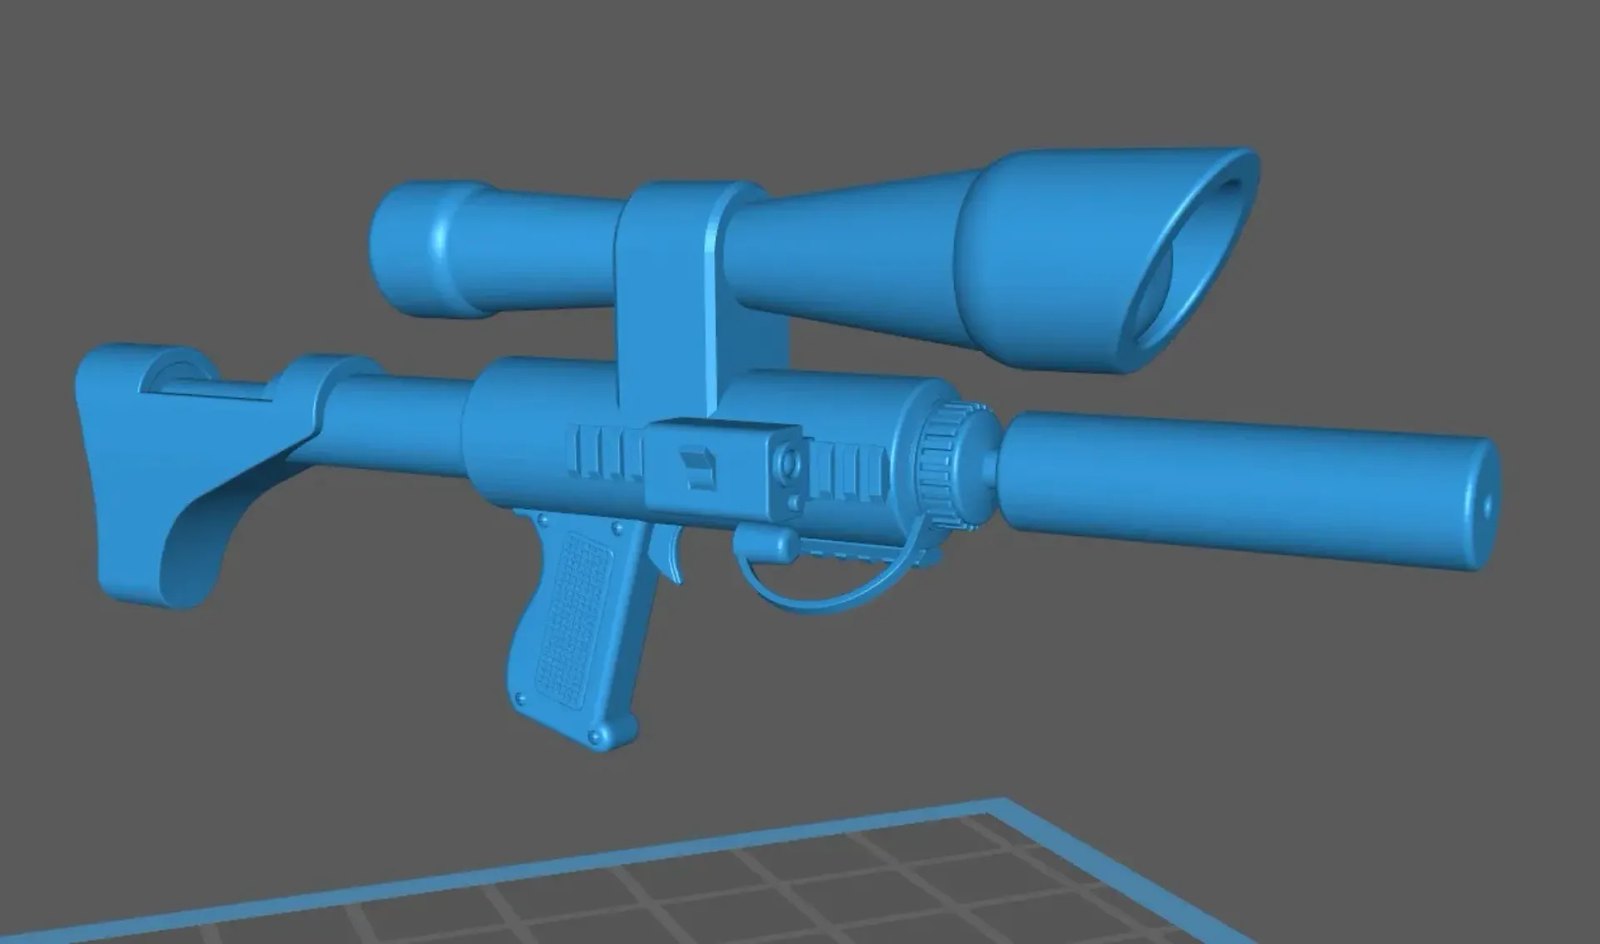 3D printable Star Wars parts and weapons for 1:6 figures (New models added, more updates in future) - Page 3 52702743514_4ea9e4bc81_h